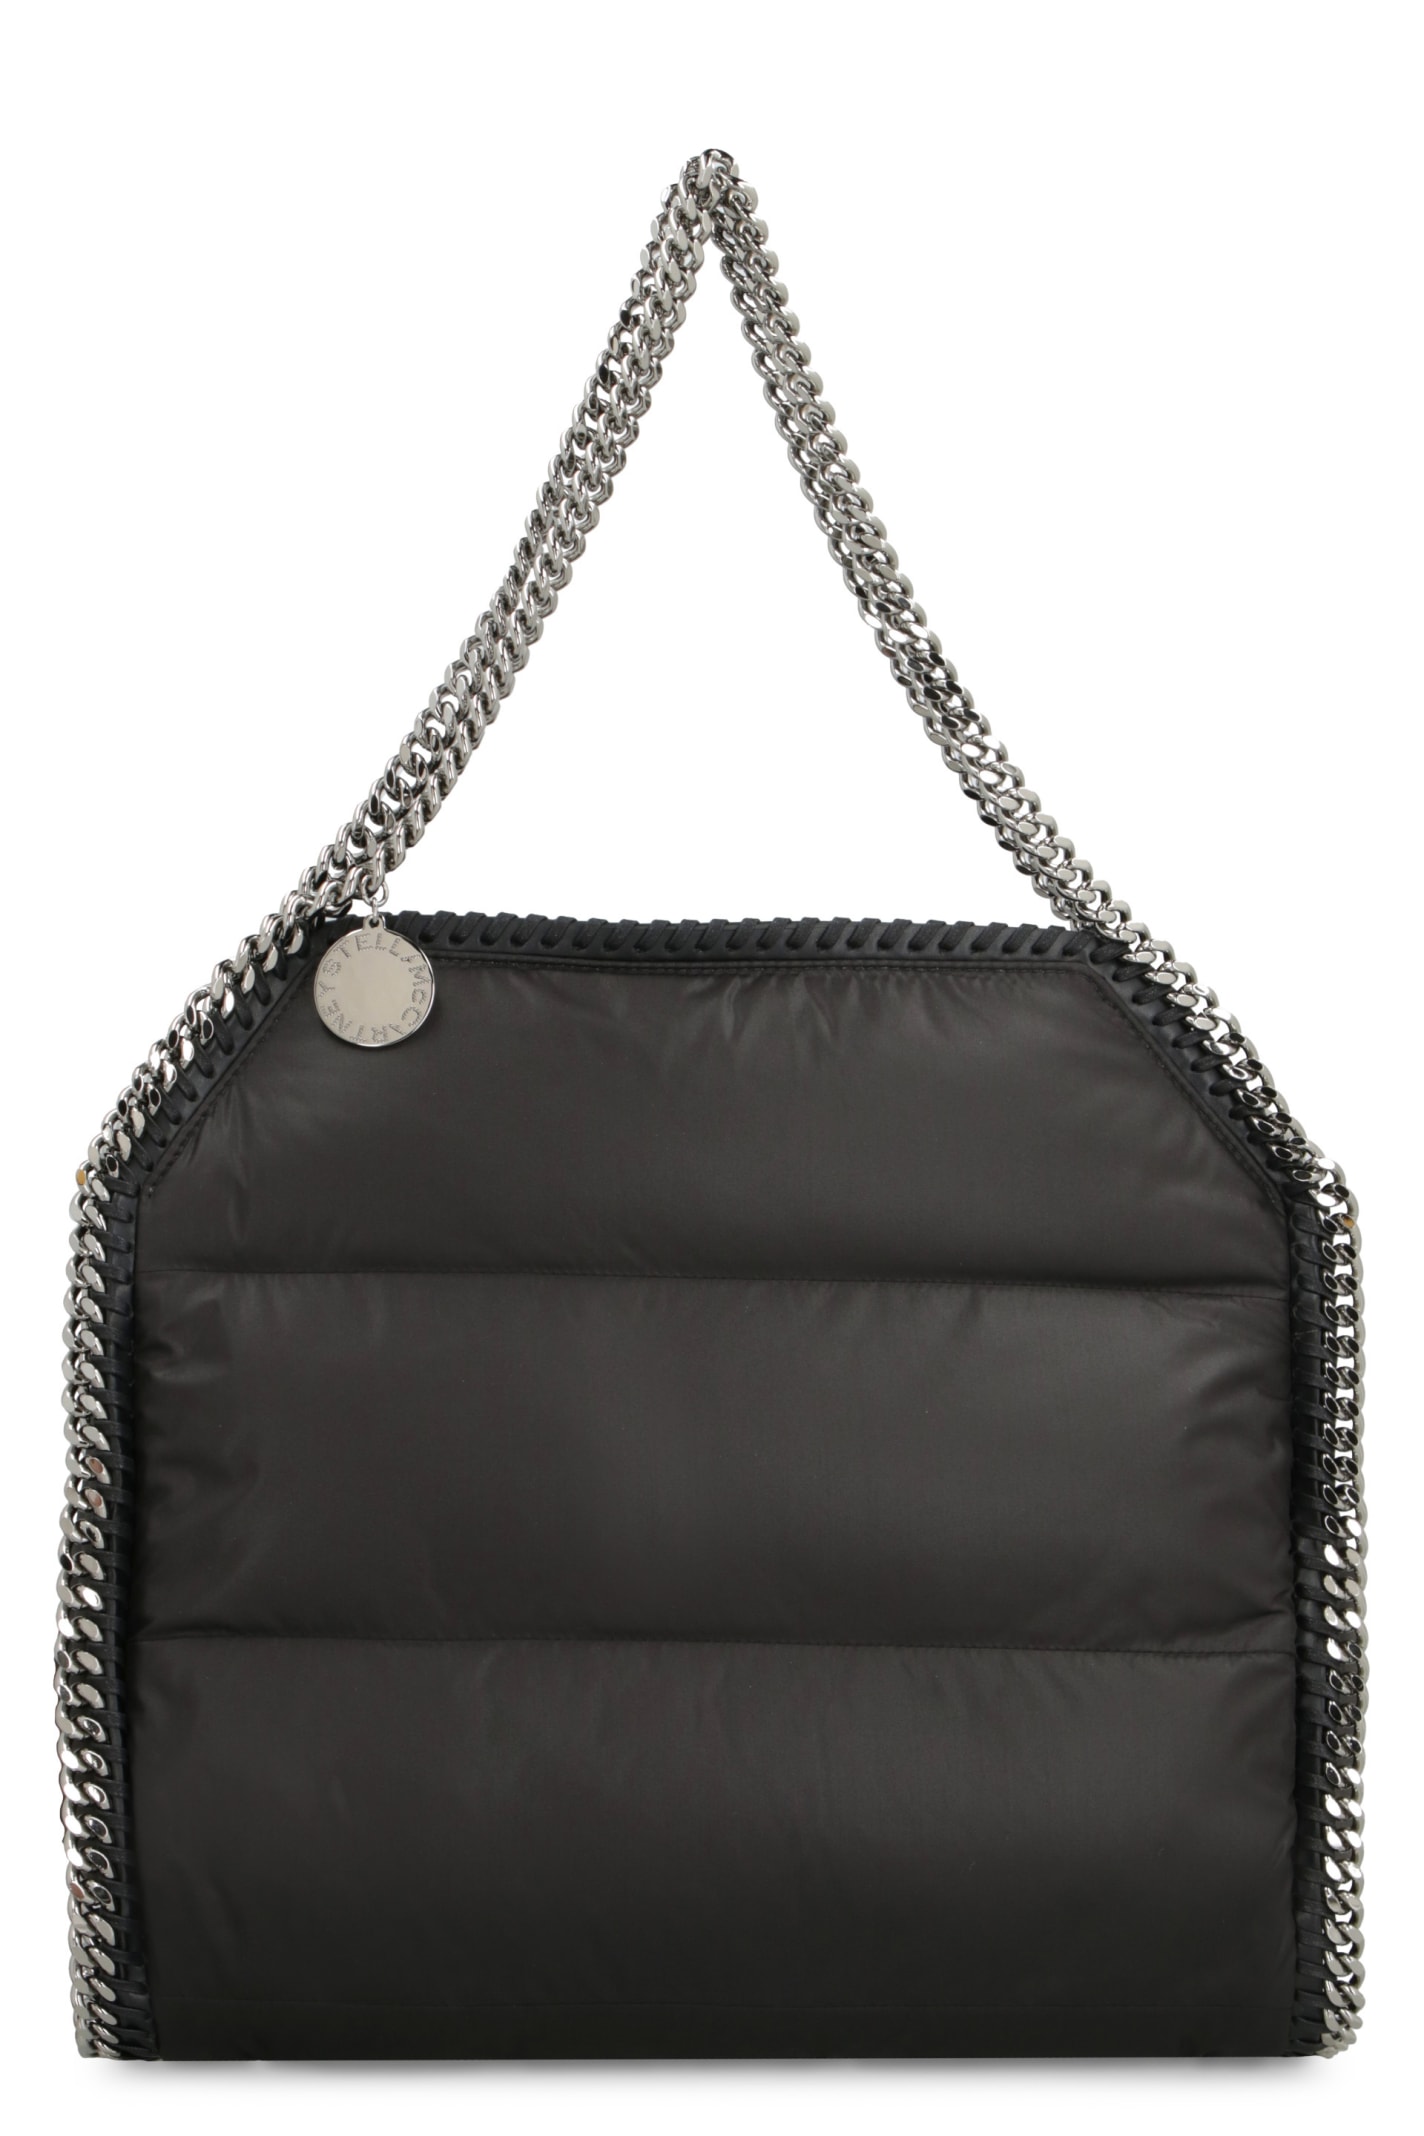 STELLA MCCARTNEY FALABELLA QUILTED NYLON TOTE BAG